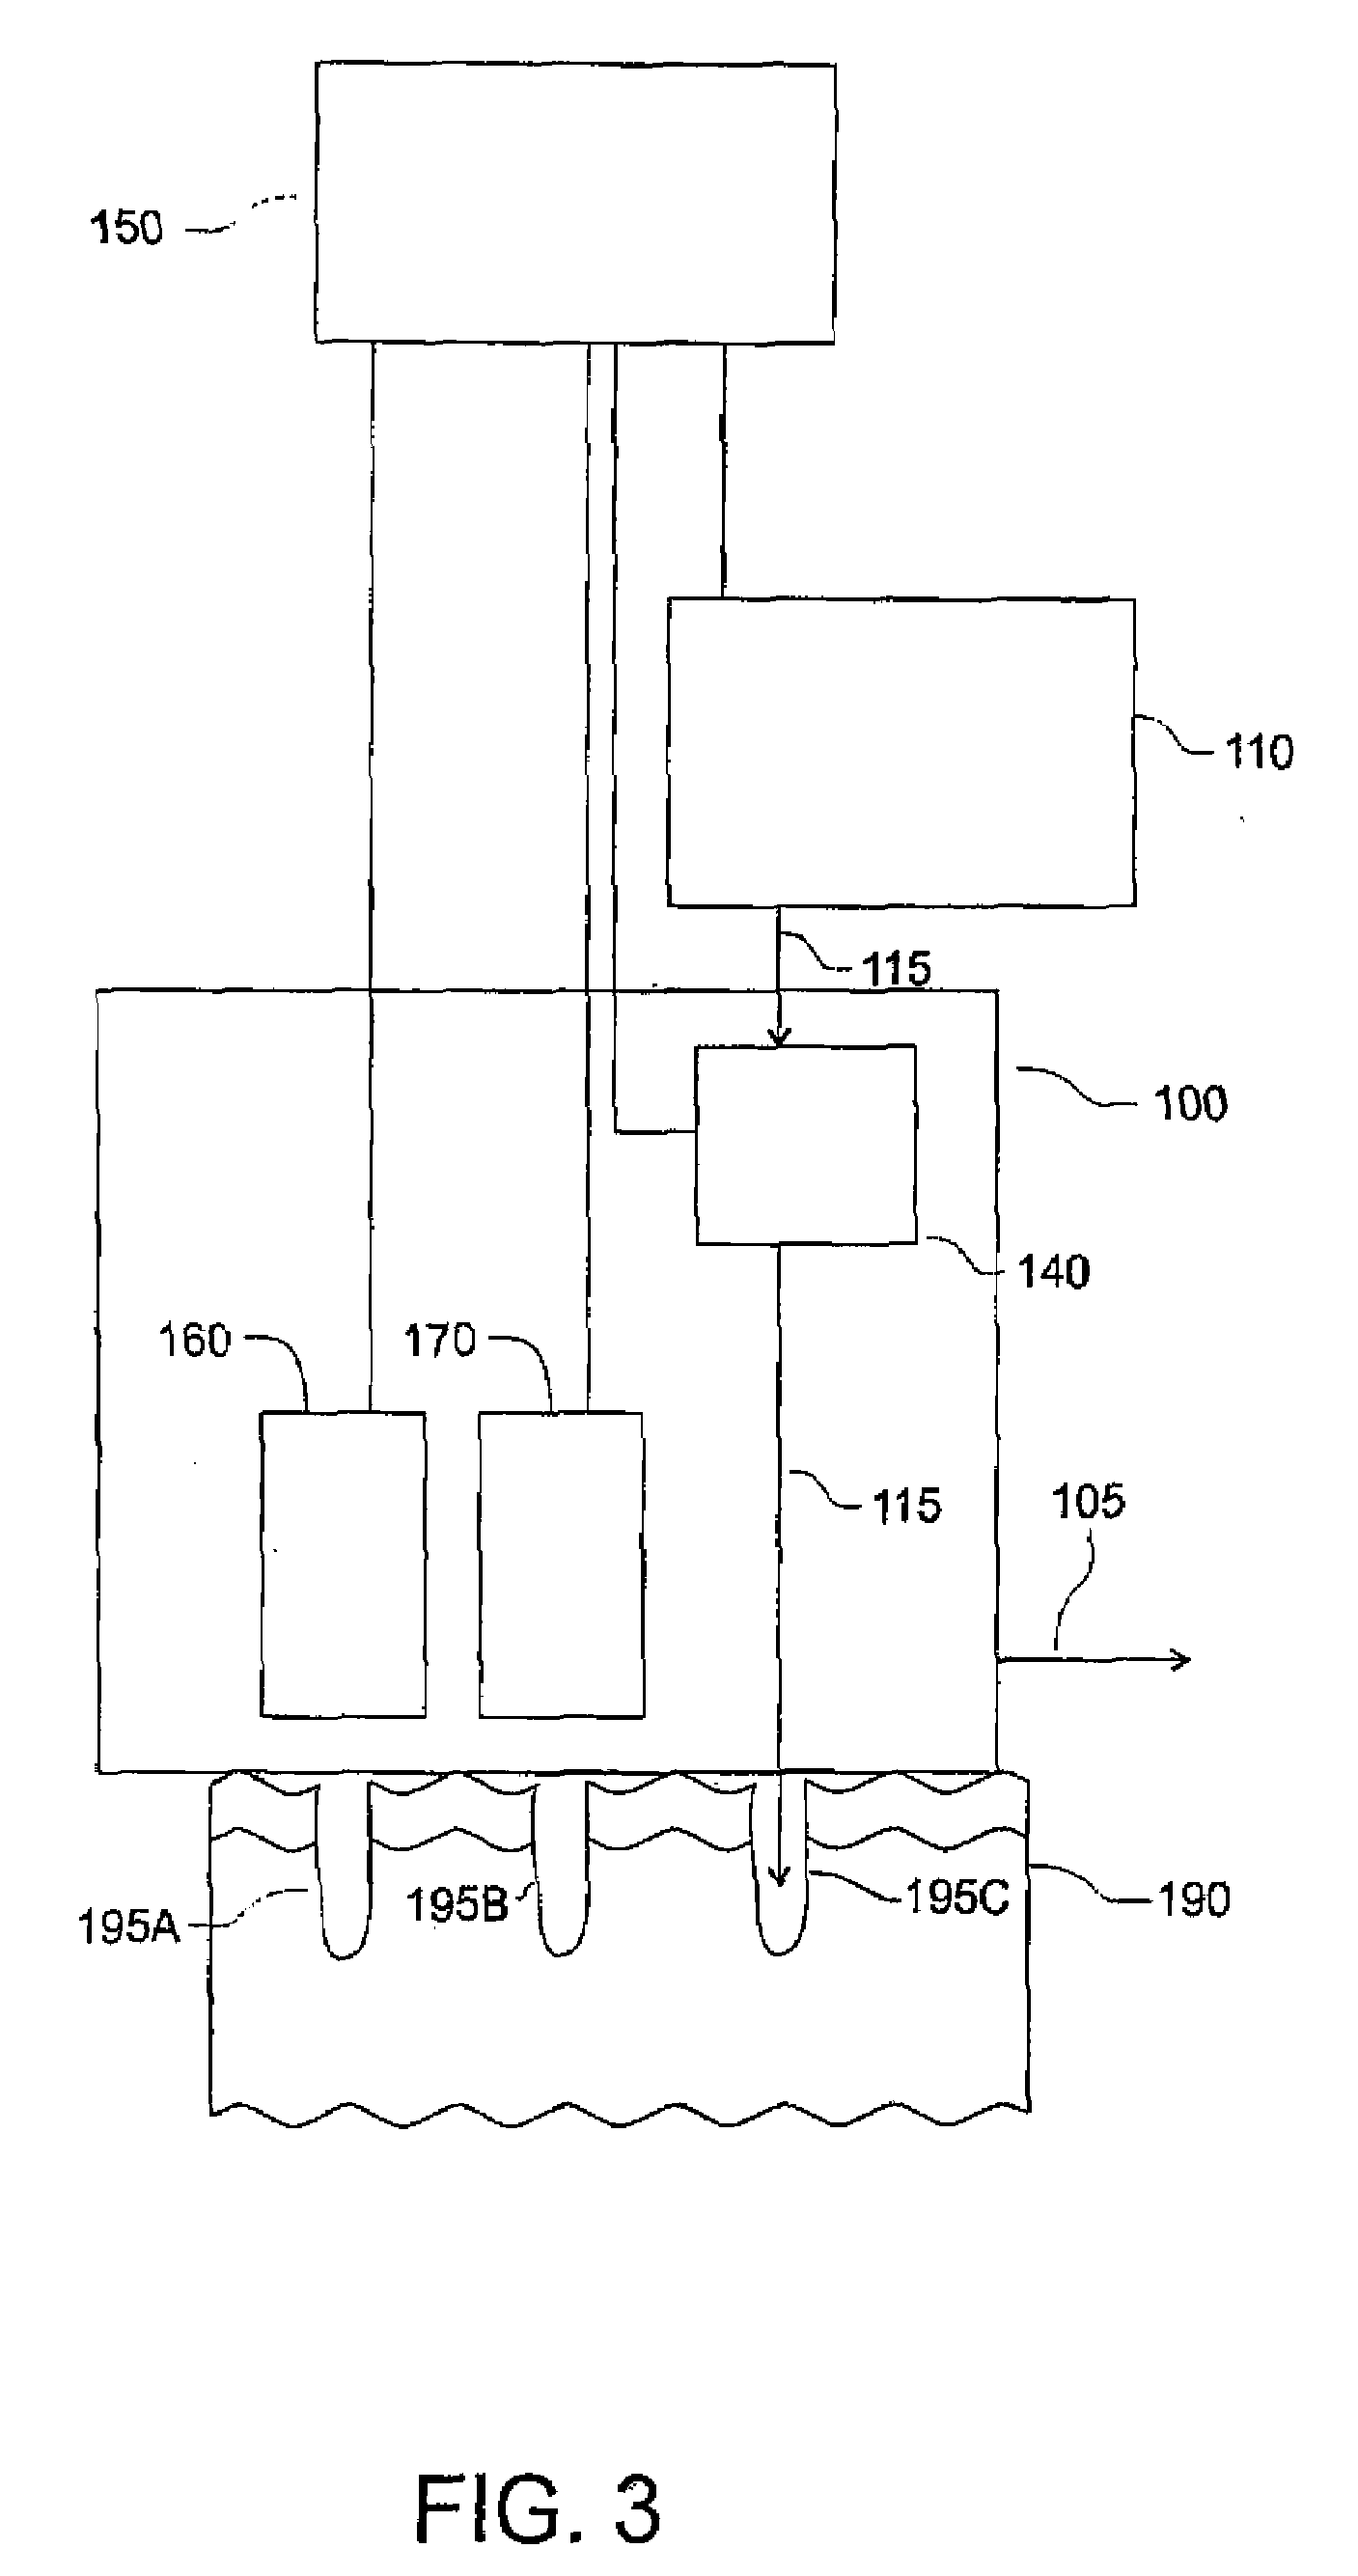 Apparatus and Method for a Combination of Ablative and Nonablative Dermatological Treatment